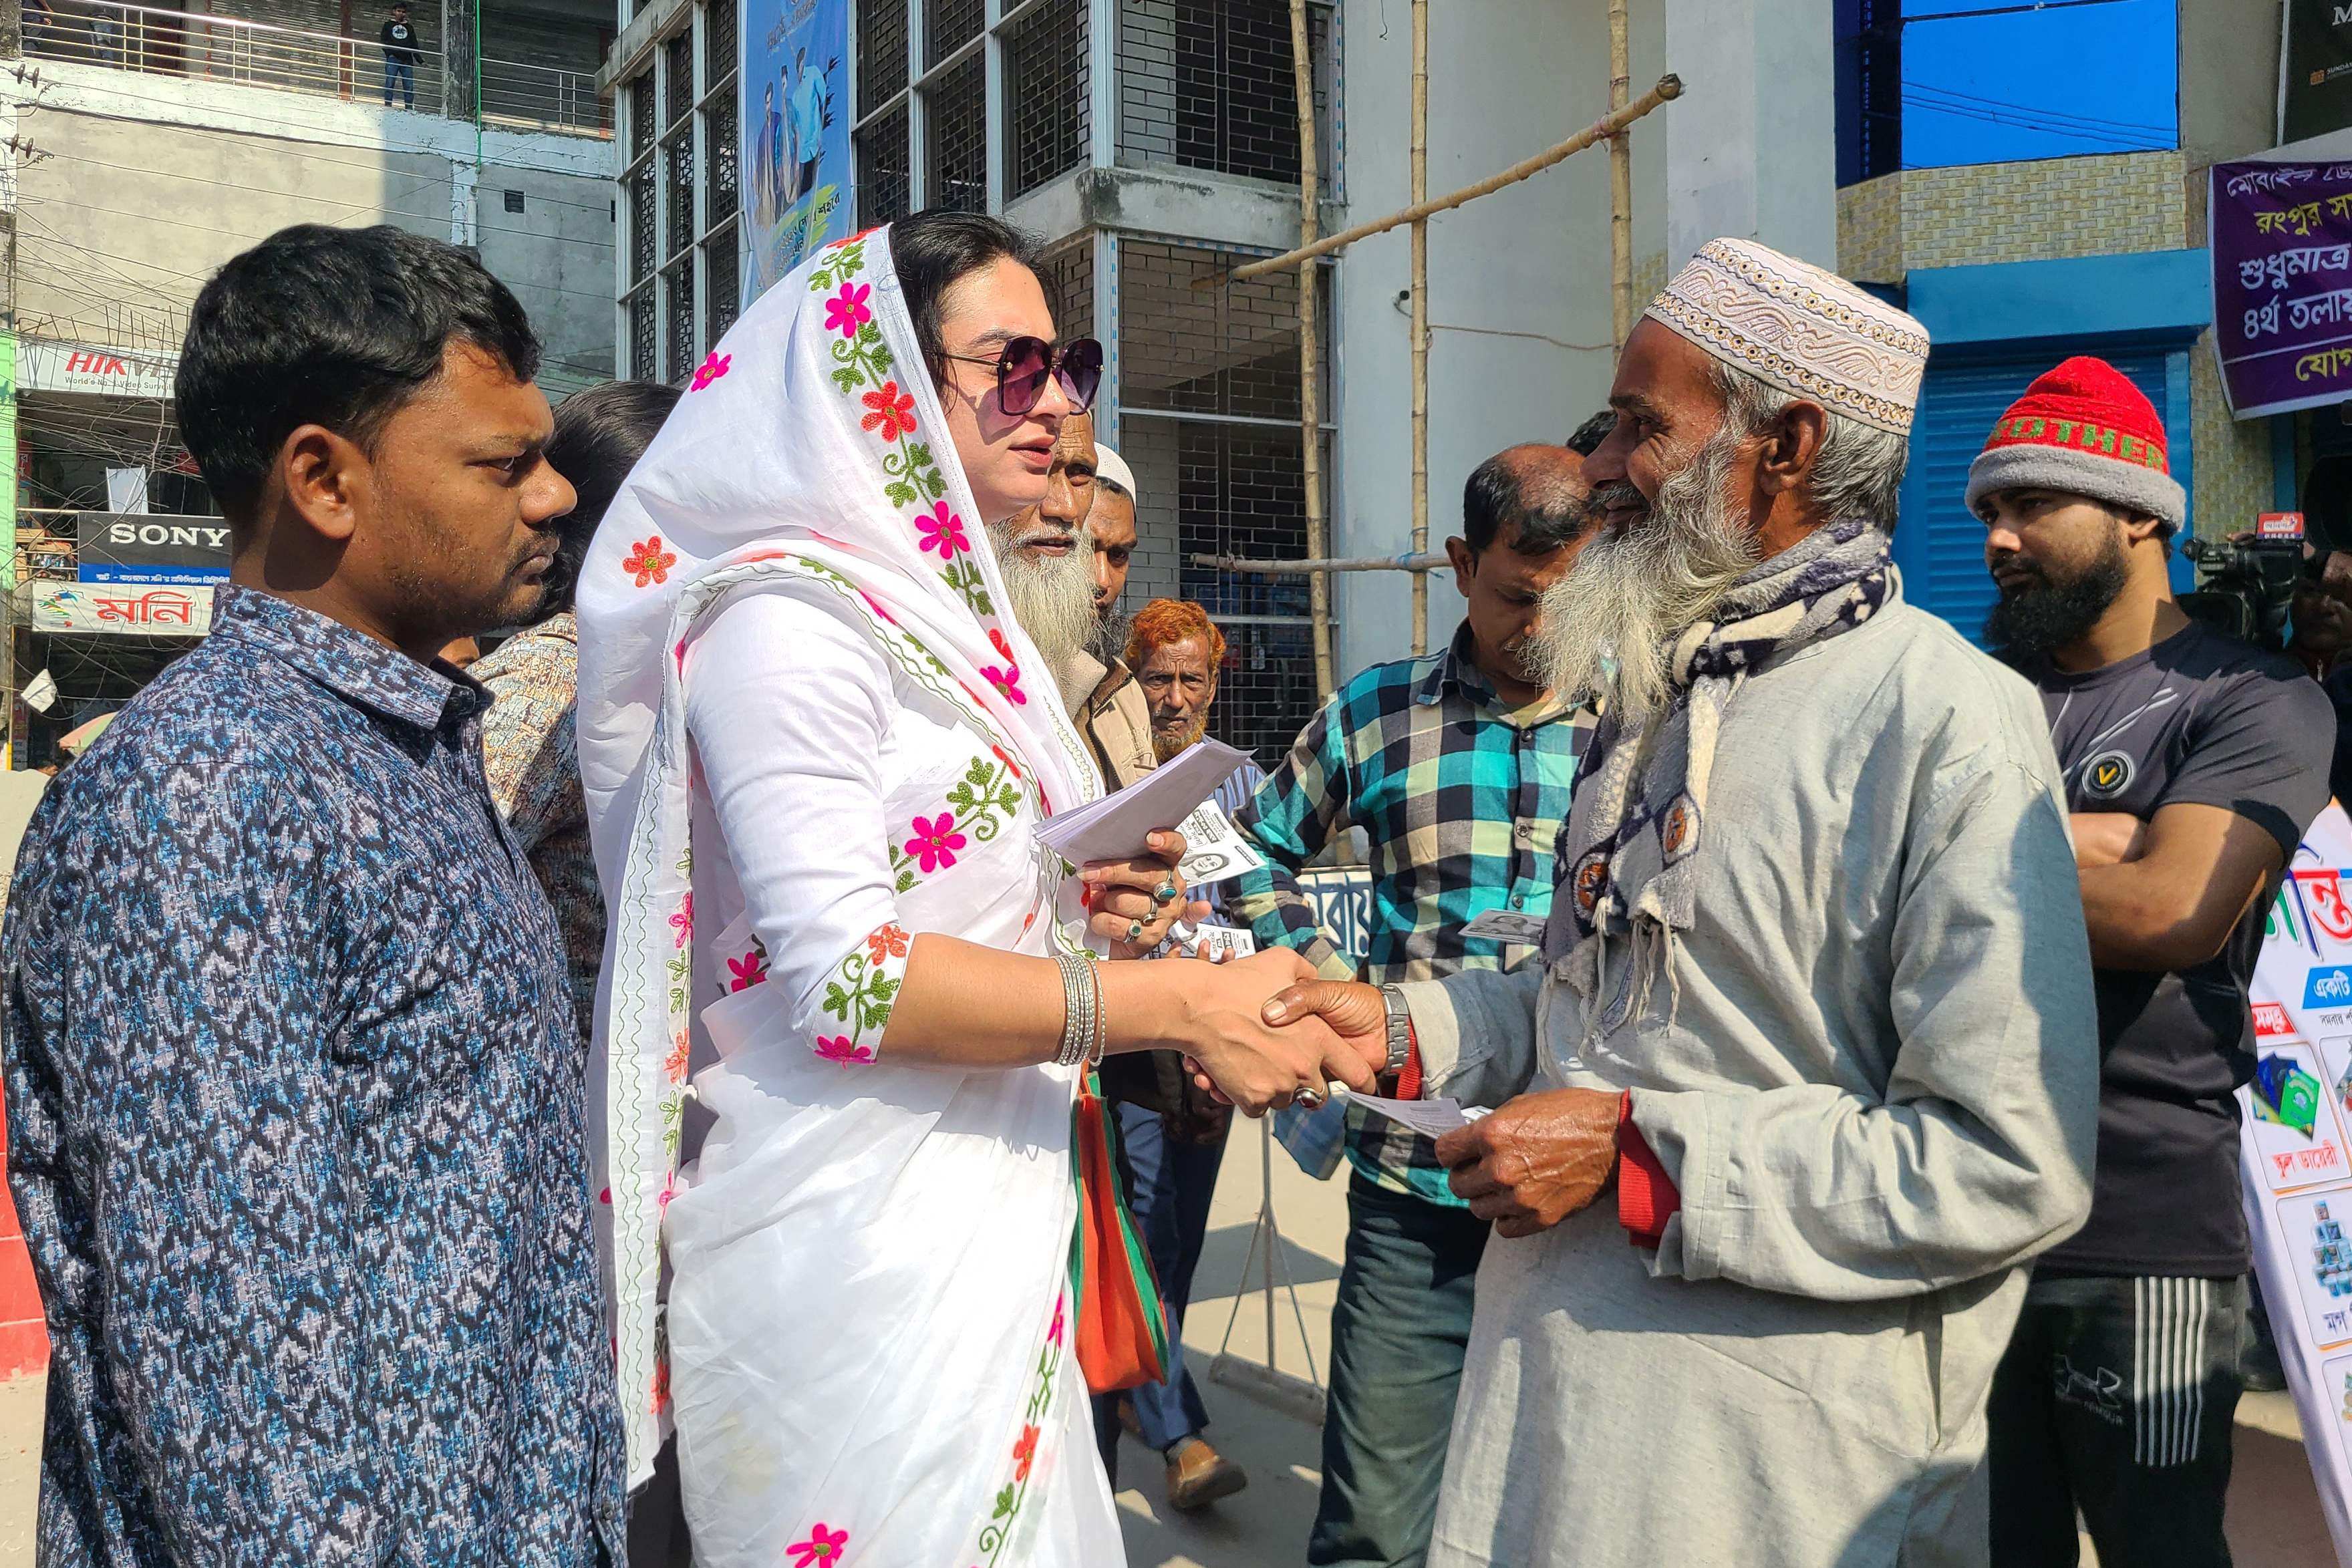 Transgender candidate Anwara Islam Rani shakes hands with a man during a campaign event in Rangpur, ahead of Bangladesh’s general election on Sunday. Photo: AFP